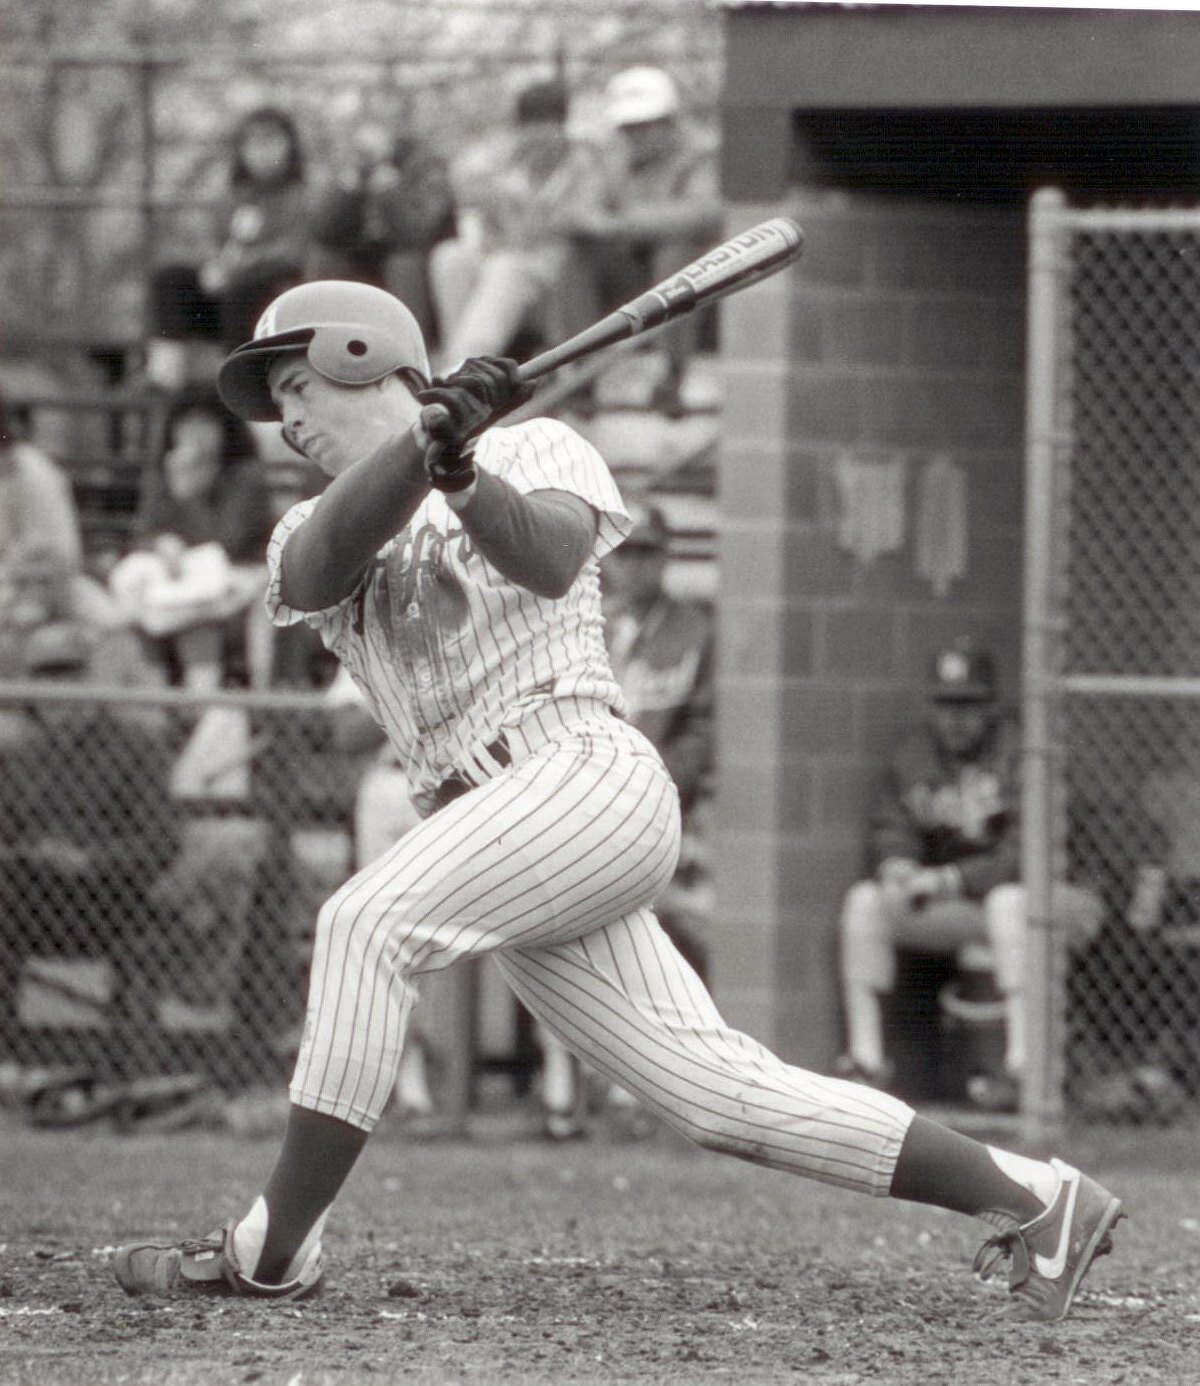 Over the course of his three seasons at the University of Hartford, Jeff Bagwell hit .413 with 31 home runs and 126 RBIs.